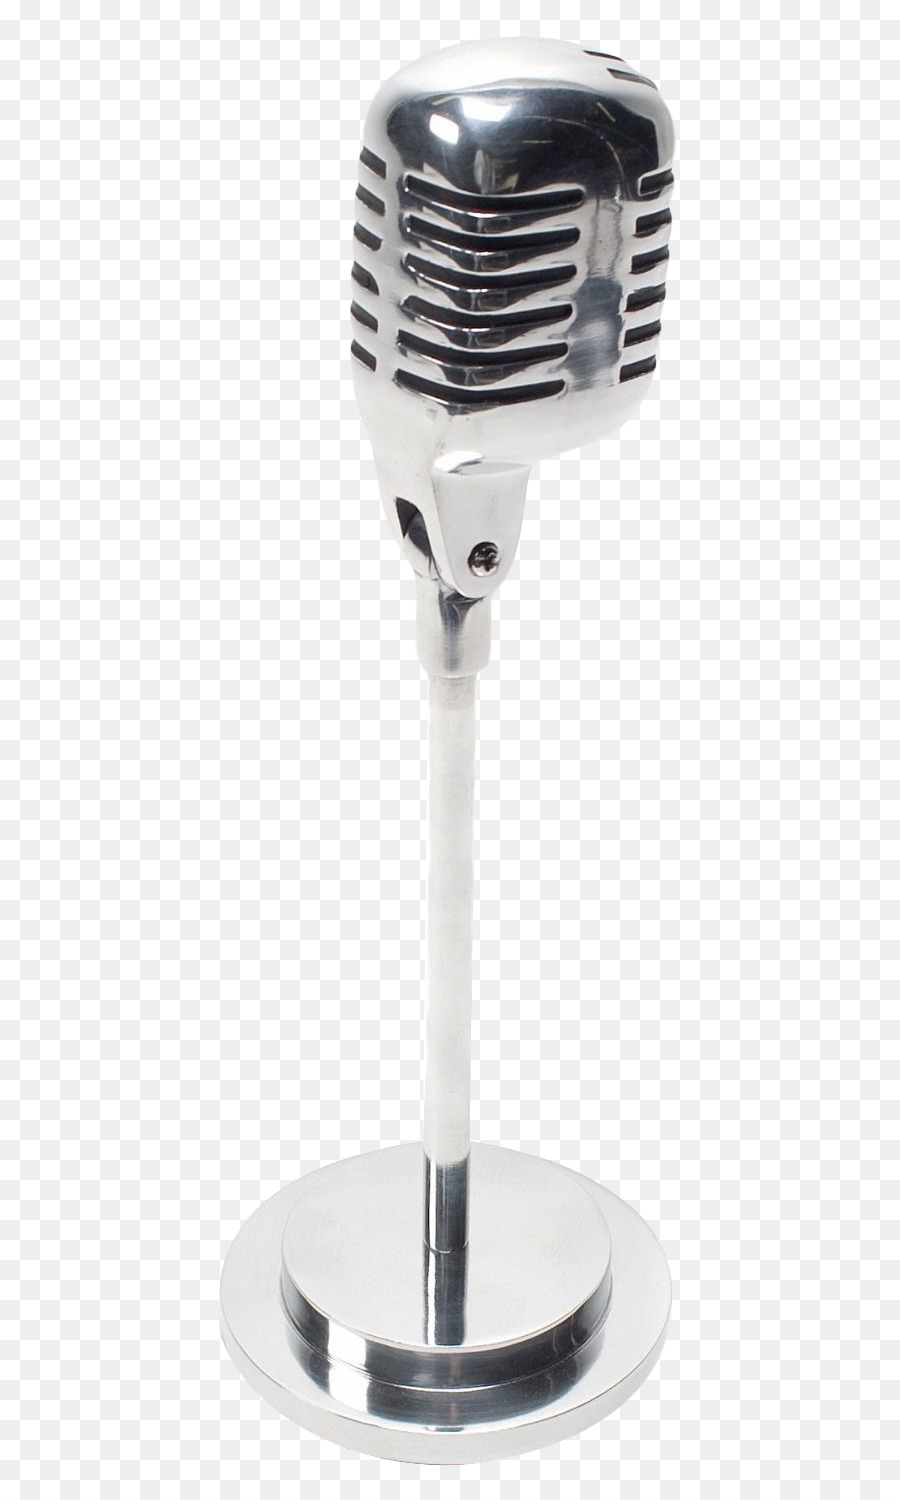 Microphone stand Interior Design Services Vintage clothing - Podcast Microphone png download - 537*1500 - Free Transparent Microphone png Download.